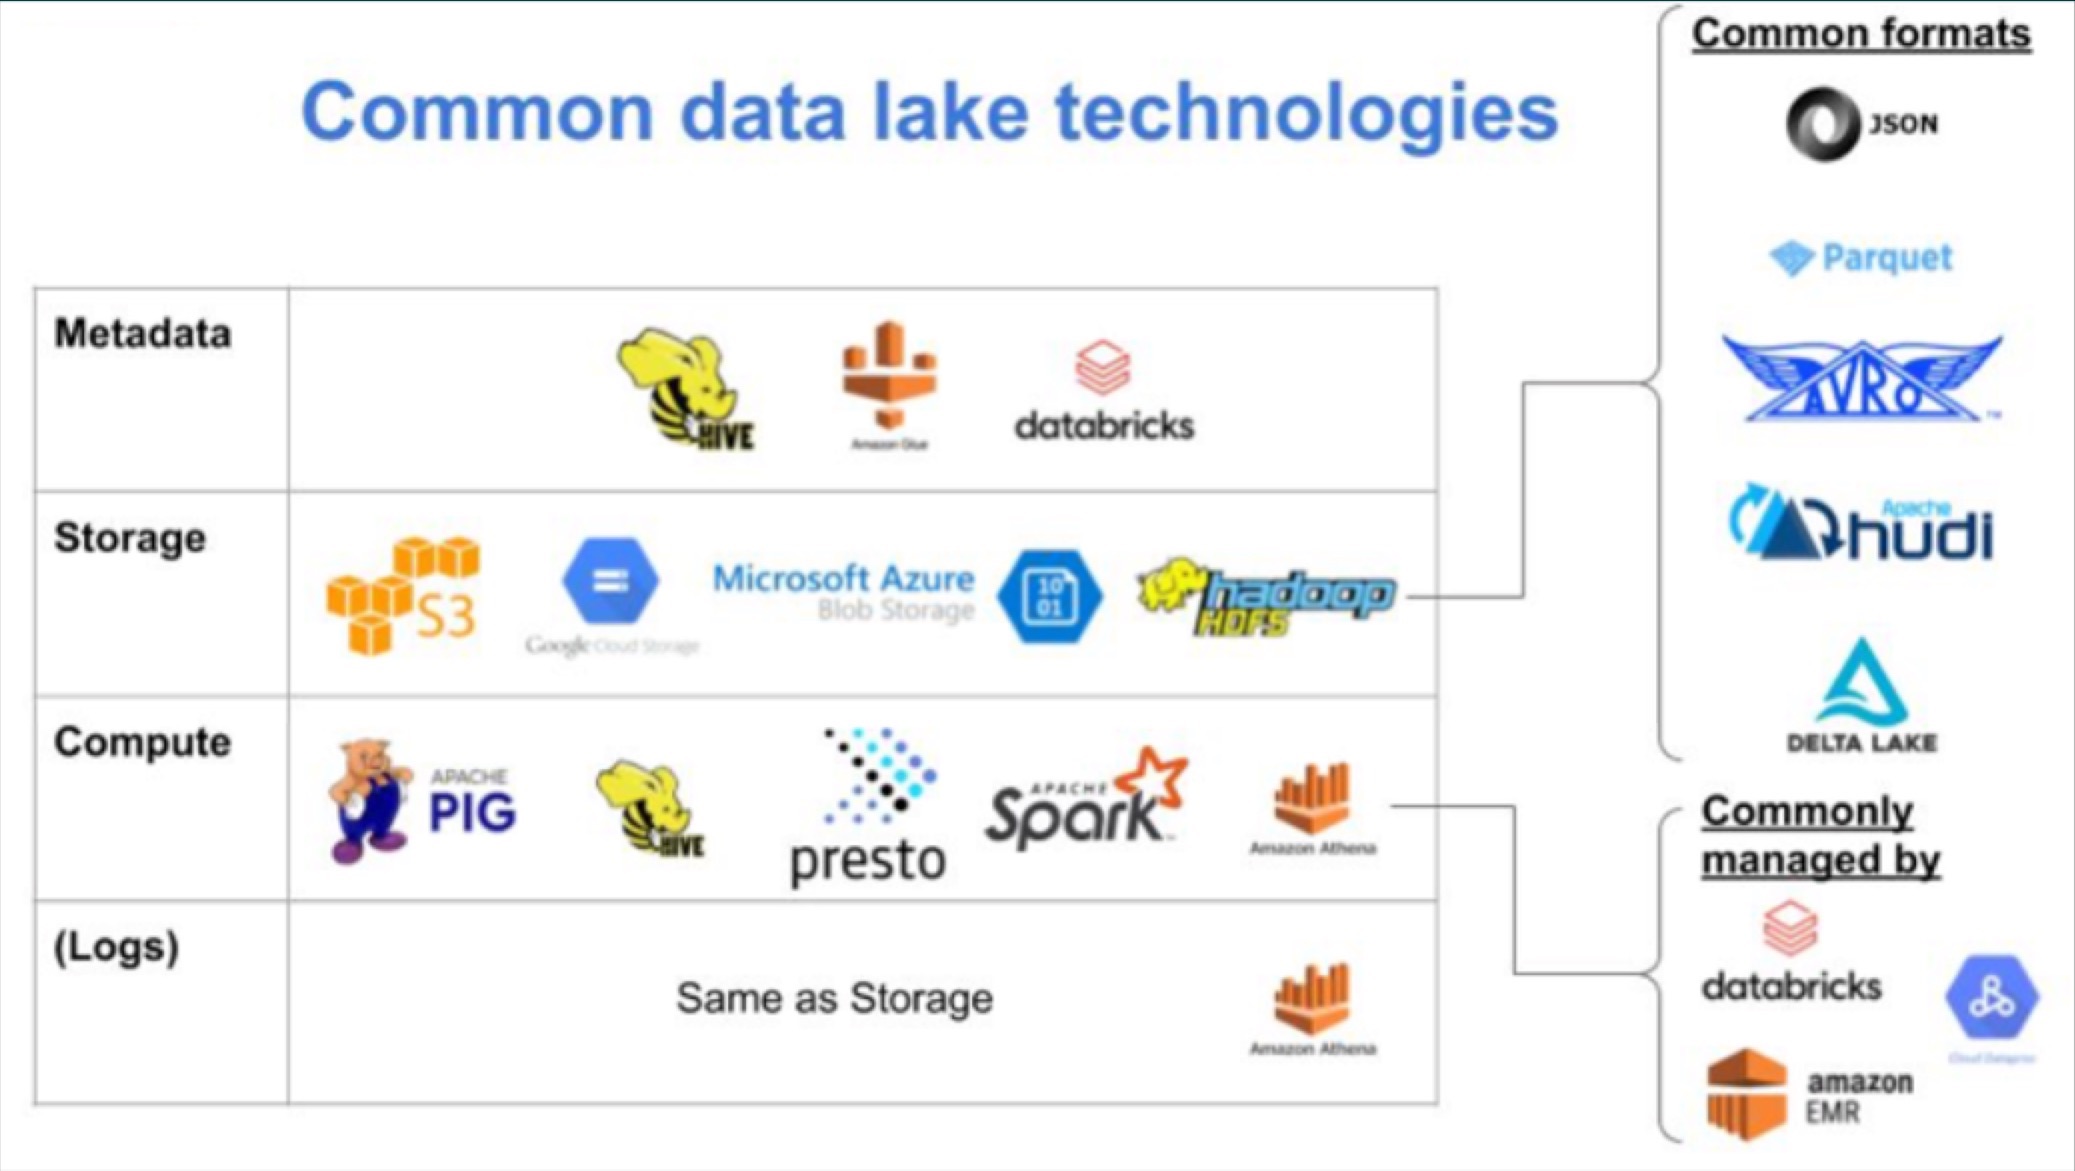 Data lakes are often built with a combination of open source and closed source technologies, making them easy to customize and able to handle increasingly complex workflows. Image courtesy of Lior Gavish.